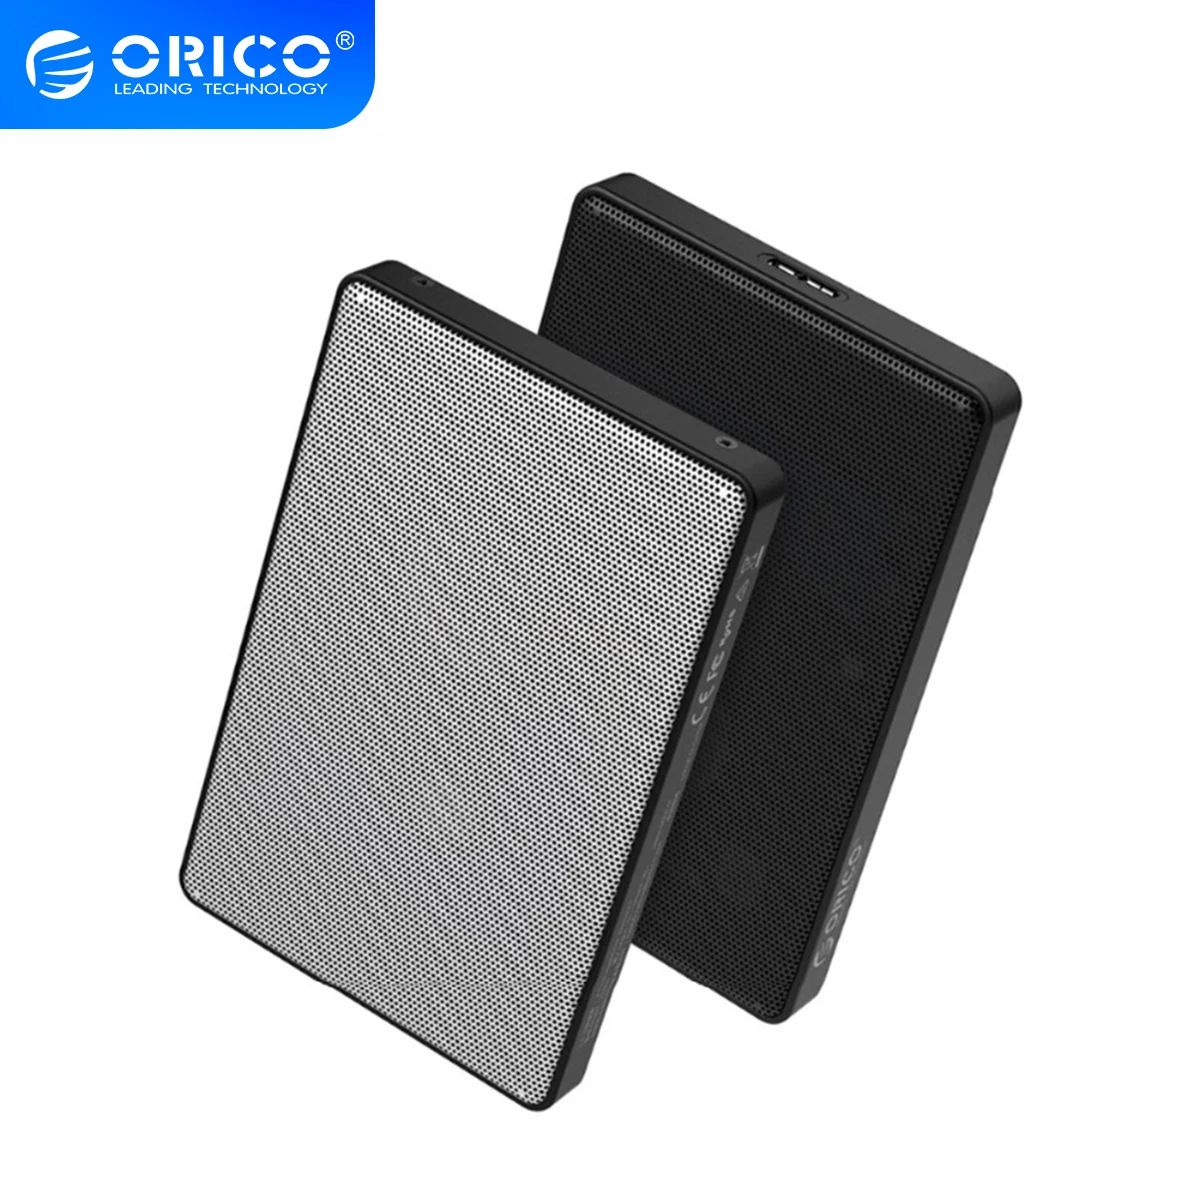 ORICO 2.5 inch HDD Case SATA to USB 3.0 SSD HDD Case 4TB Hard Disk Drive Box External HDD Enclosure for Samsung Seagate